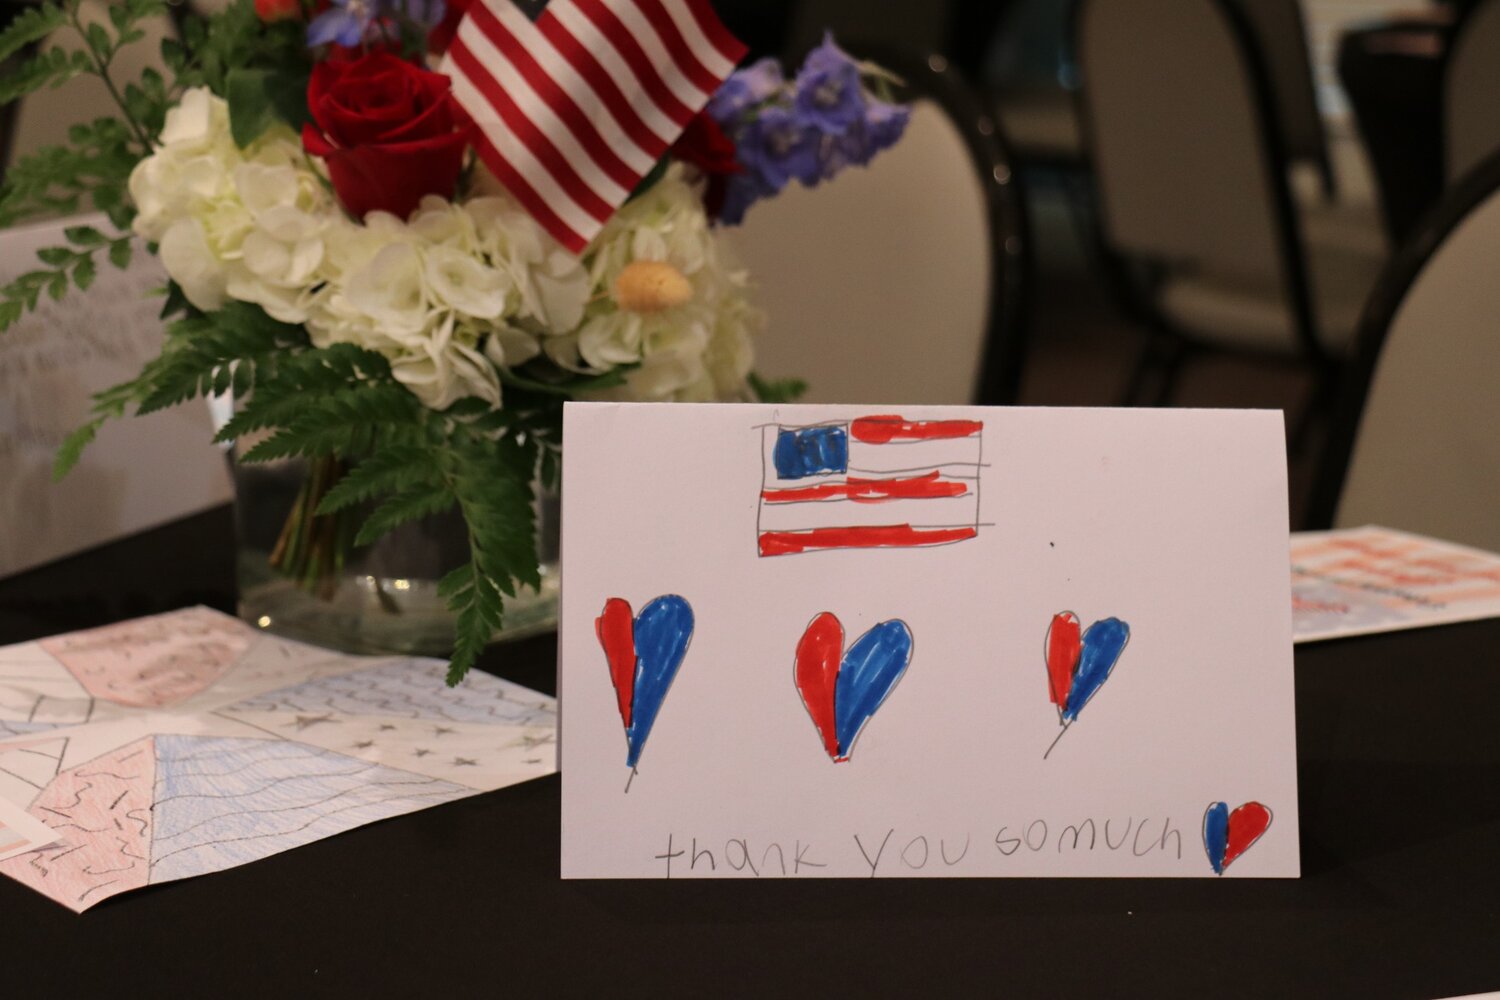 Bay Minette Elementary Students decorated letters and cards for annual City of Bay Minette Veterans Day breakfast for local veterans and their families.